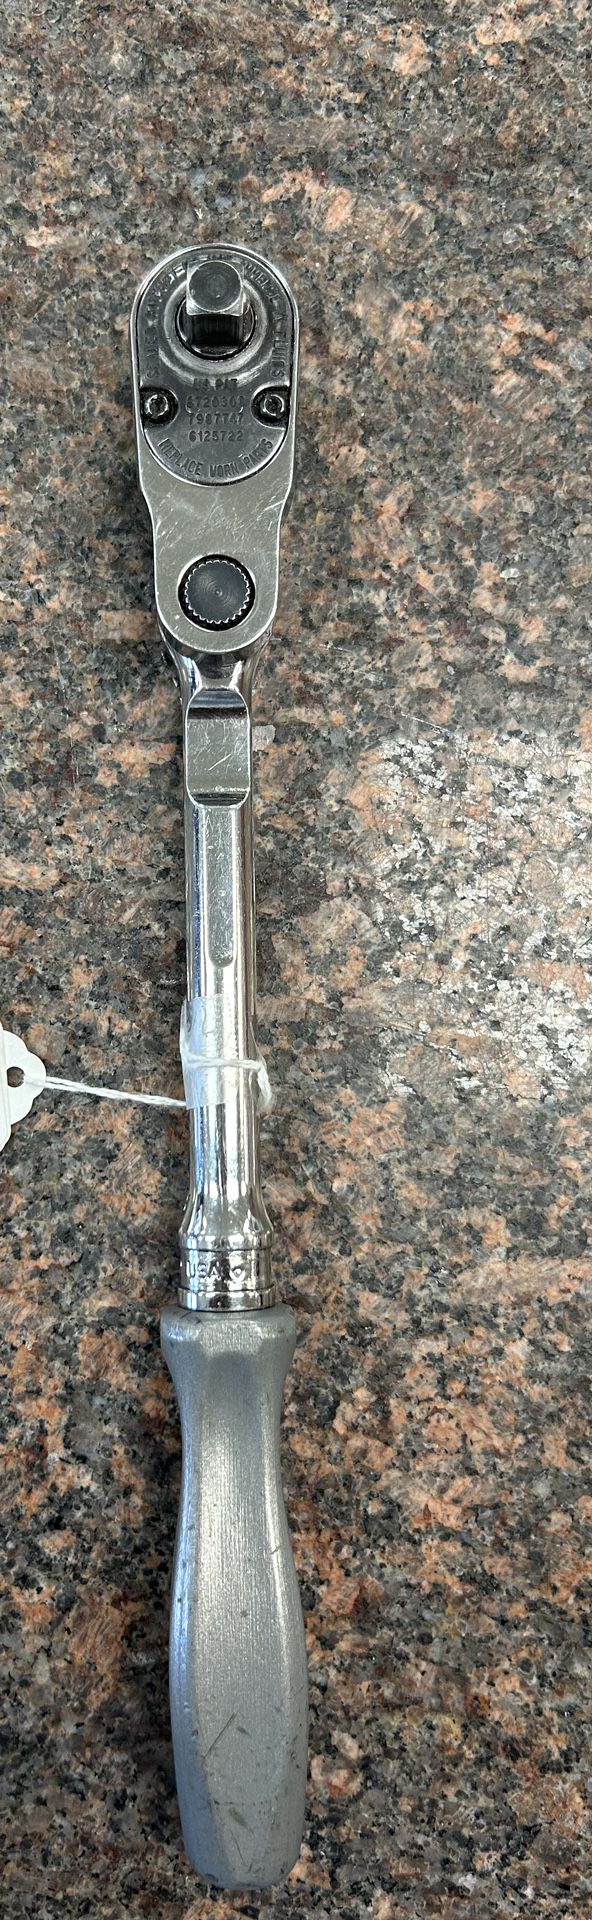 Snap On Indexing Head Ratchet 3/8 “